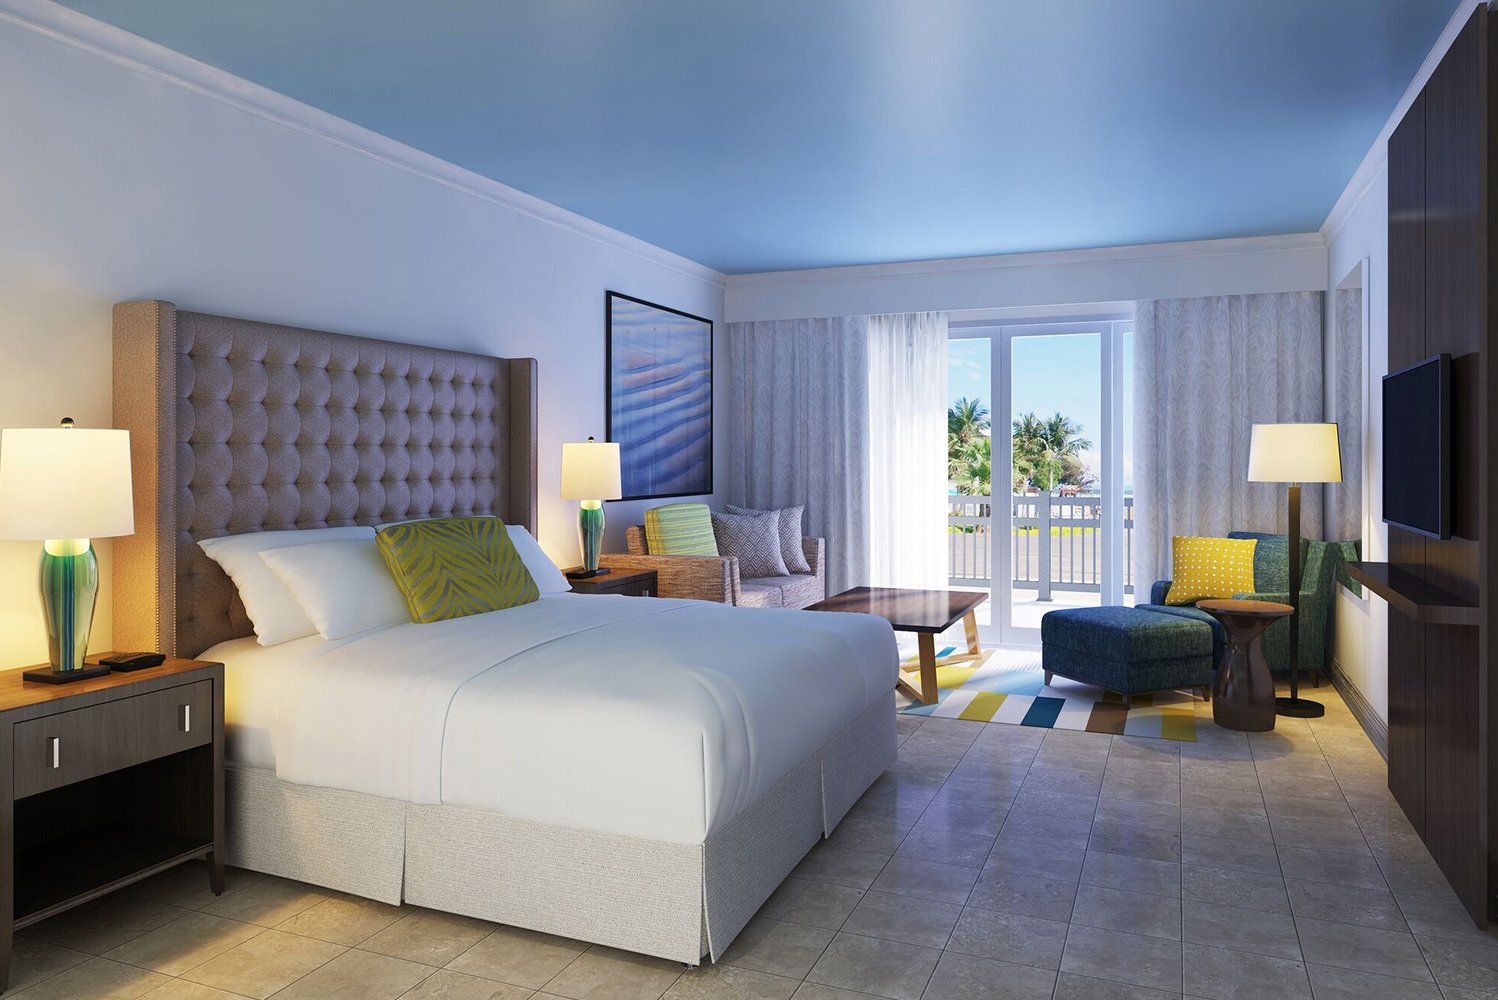 St Kitts Marriott Resort completed itsrenovations that saw the property transformall 389 rooms and the main lobby